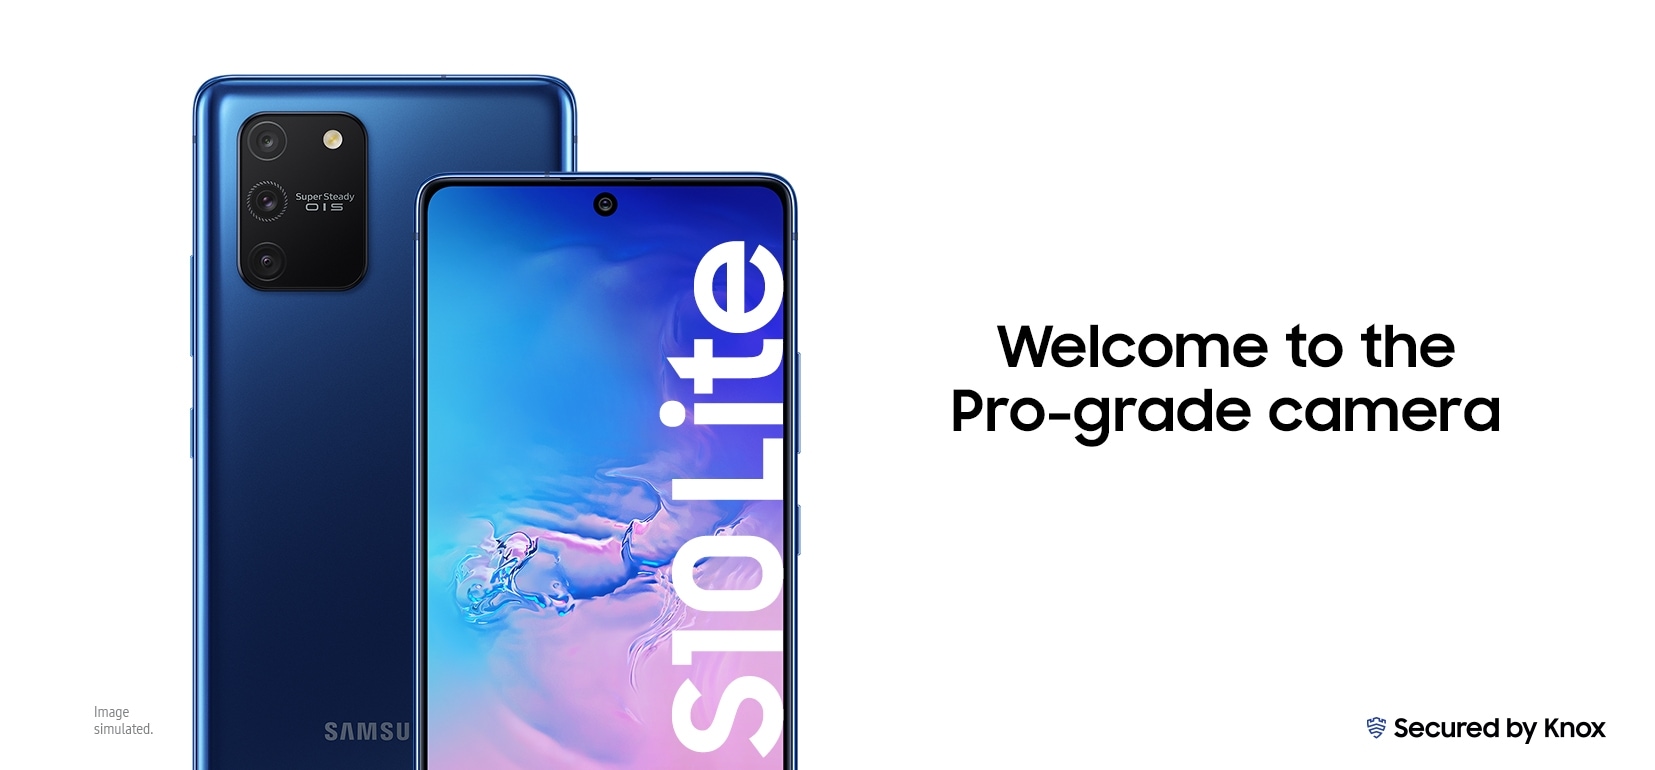 Samsung Galaxy S10 Lite Offers - Terms and Conditions